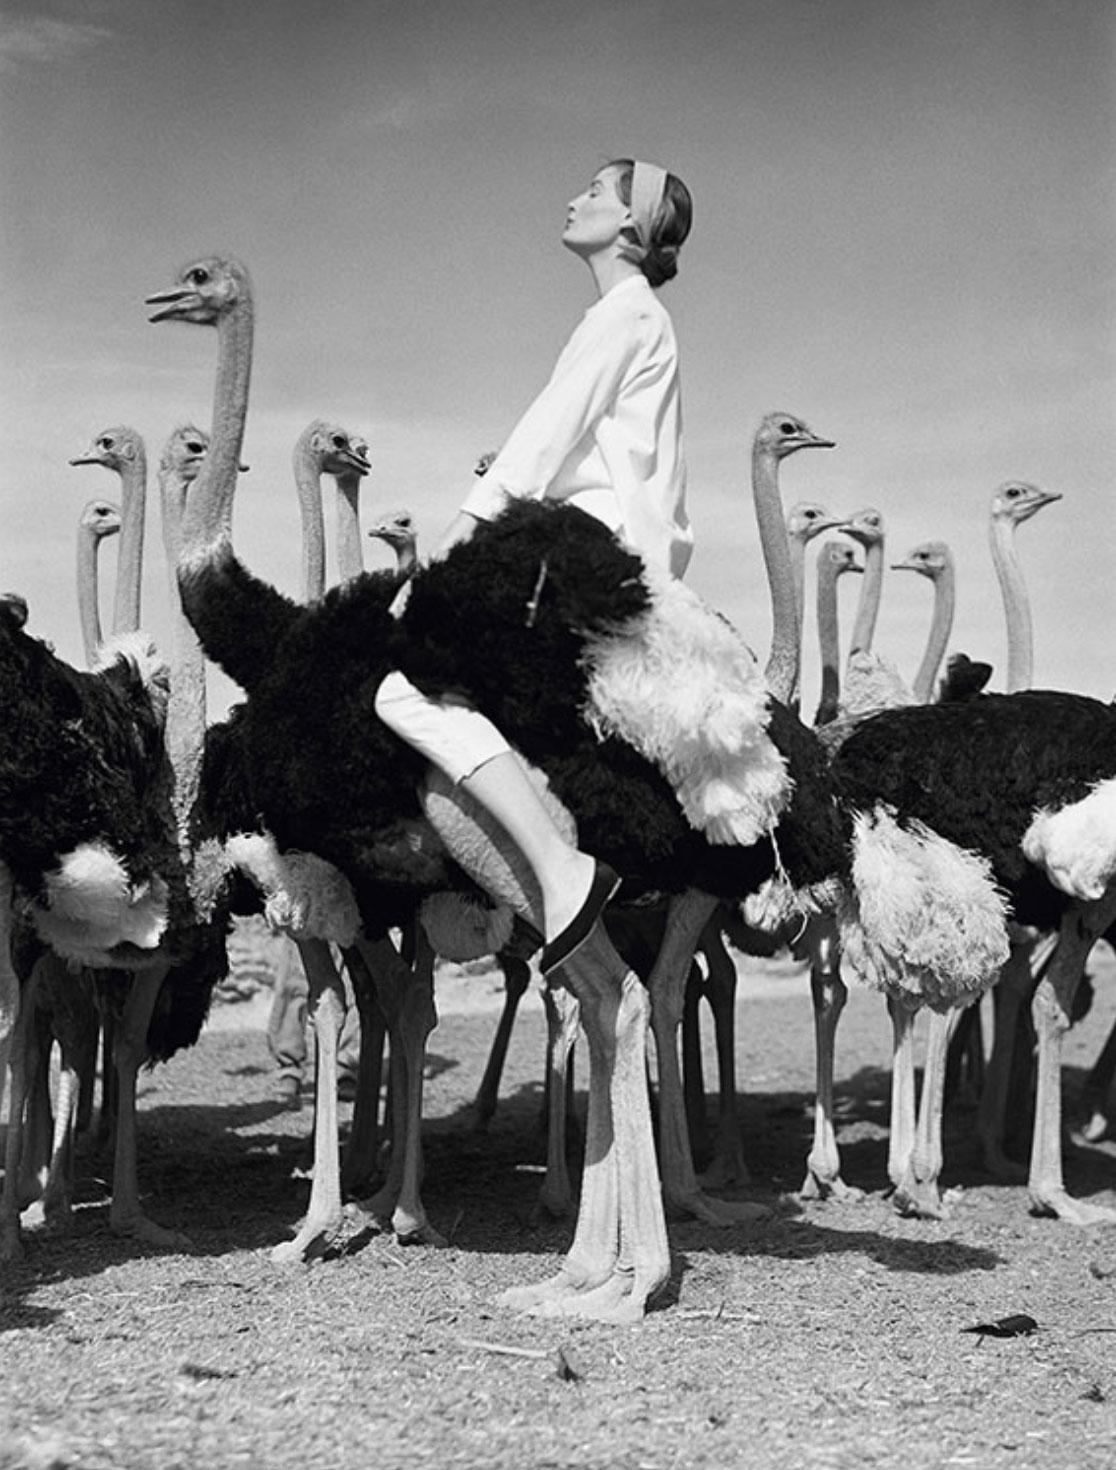 Norman Parkinson
Wenda and Ostriches
1951 (printed later)
C print
40 x 30 inches 
Estate stamped and numbered edition of 21 on verso

Wenda Parkinson wearing knee-buttoned jeans and loose shirt by Spectator Sports. An alternative frame was